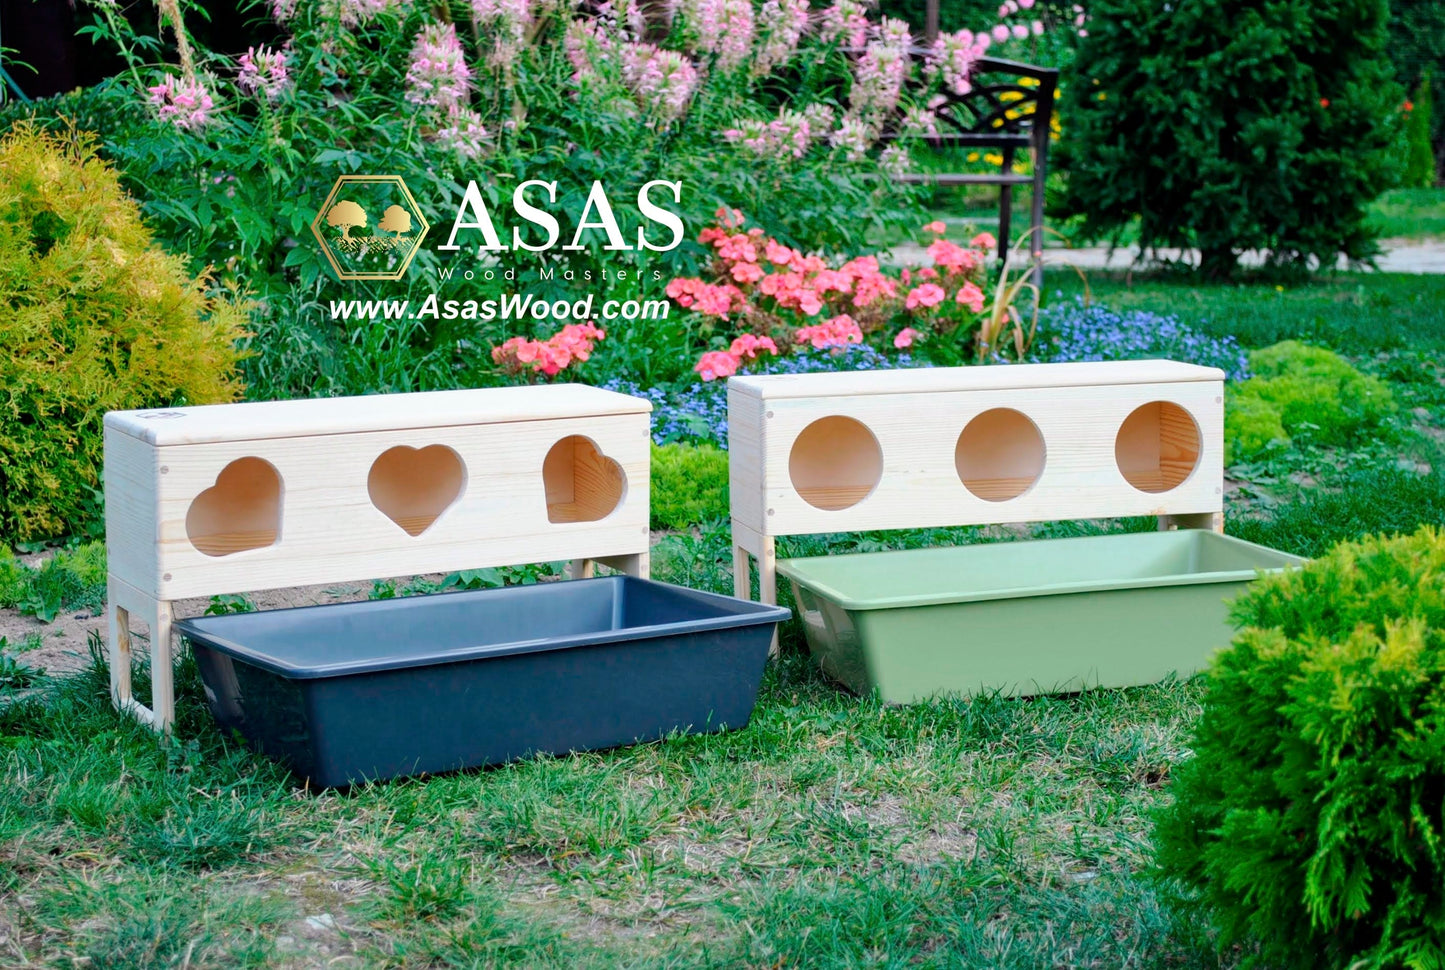 rabbit hay feeders with round and heart shape holes for hay, surrounded by flowers, made by asaswood